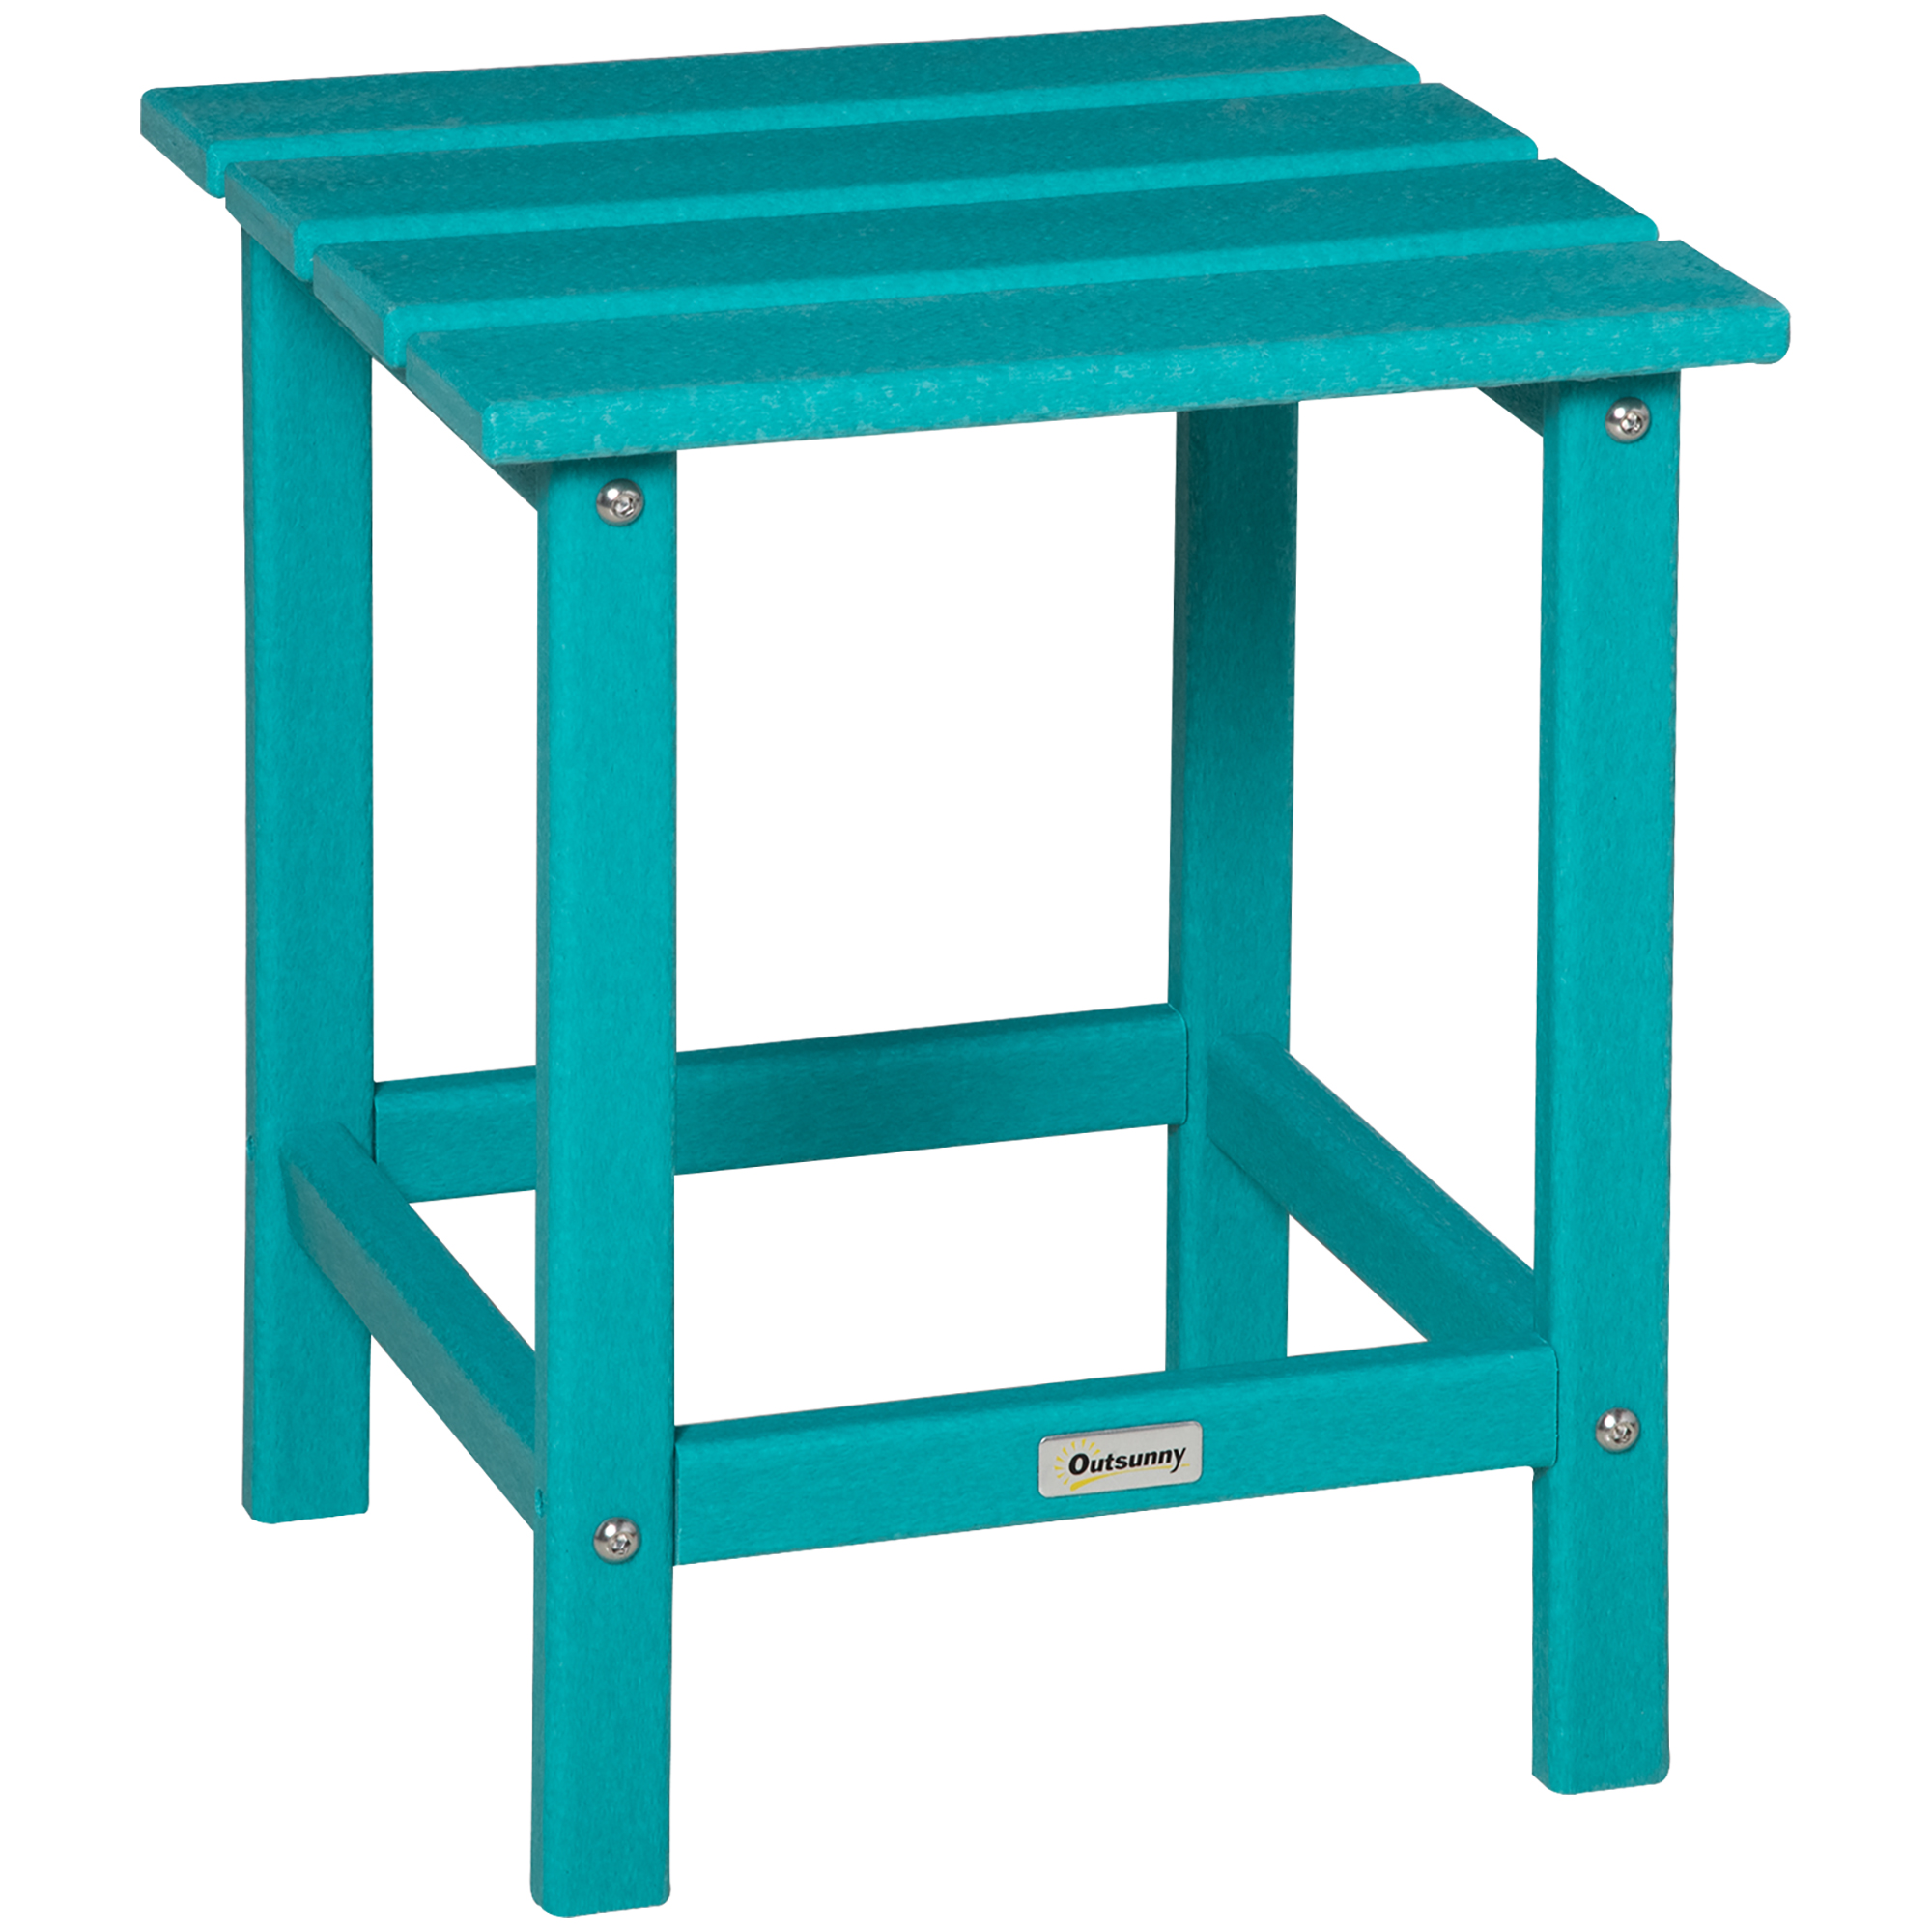 Outsunny 15" Patio End Table, HDPE Plastic, Turquoise - image 1 of 9